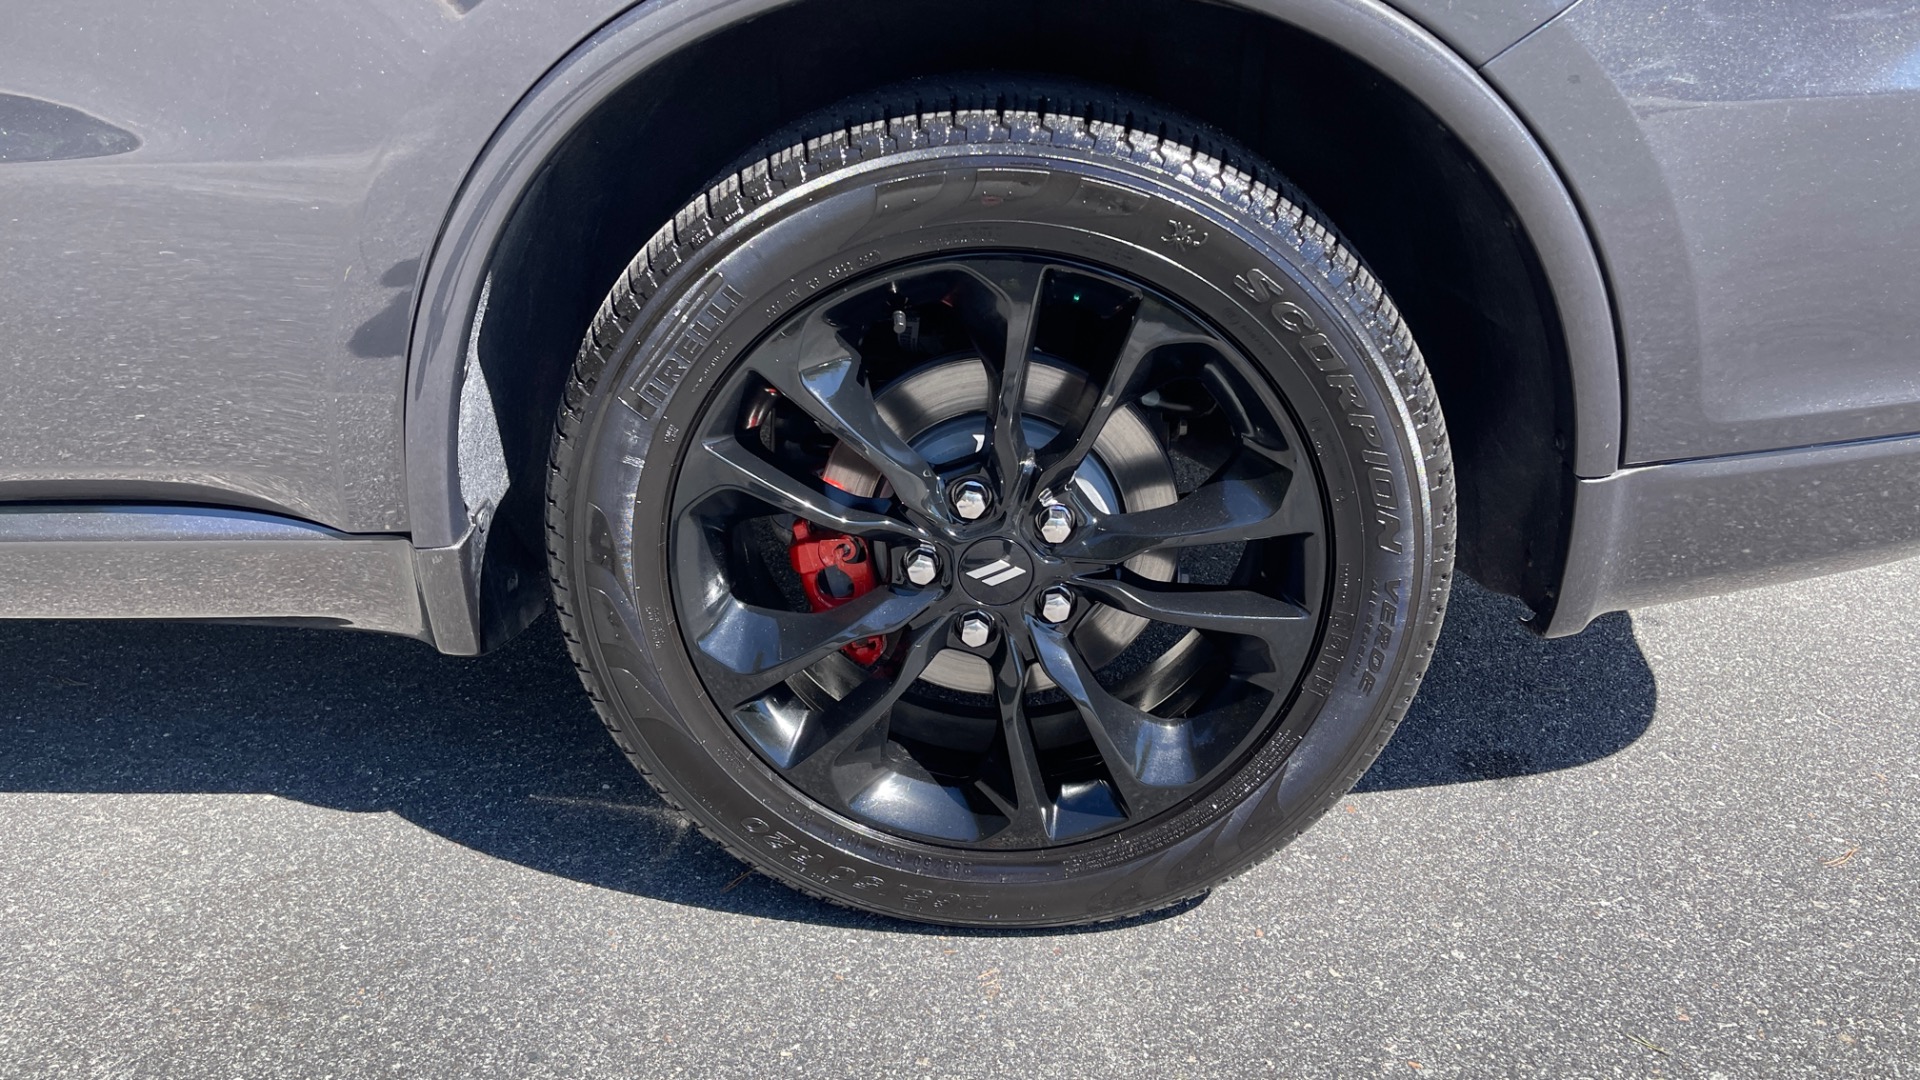 Used 2020 Dodge Durango R/T / HEMI / BLACKTOP / 20IN WHEELS / TOW PACKAGE for sale $45,995 at Formula Imports in Charlotte NC 28227 40